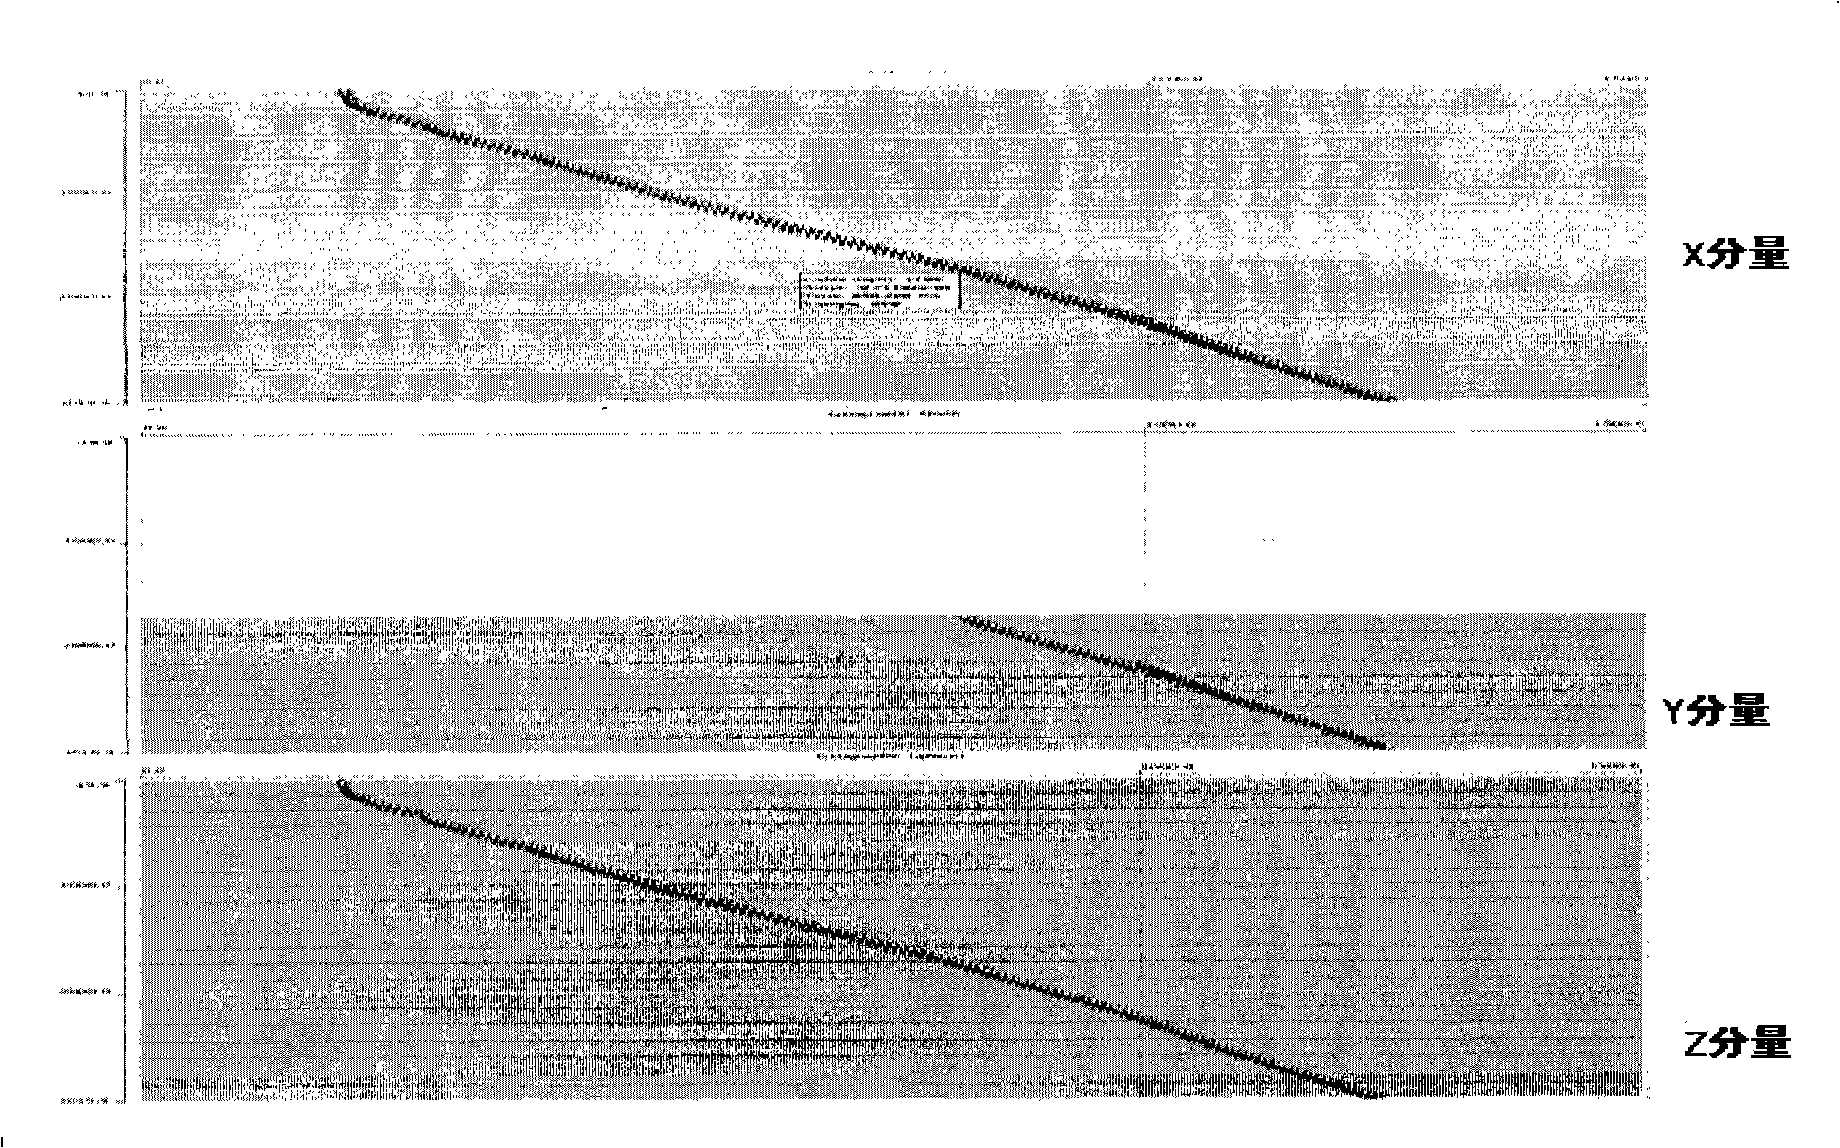 Method for determining formation lithologic character and pore fluid